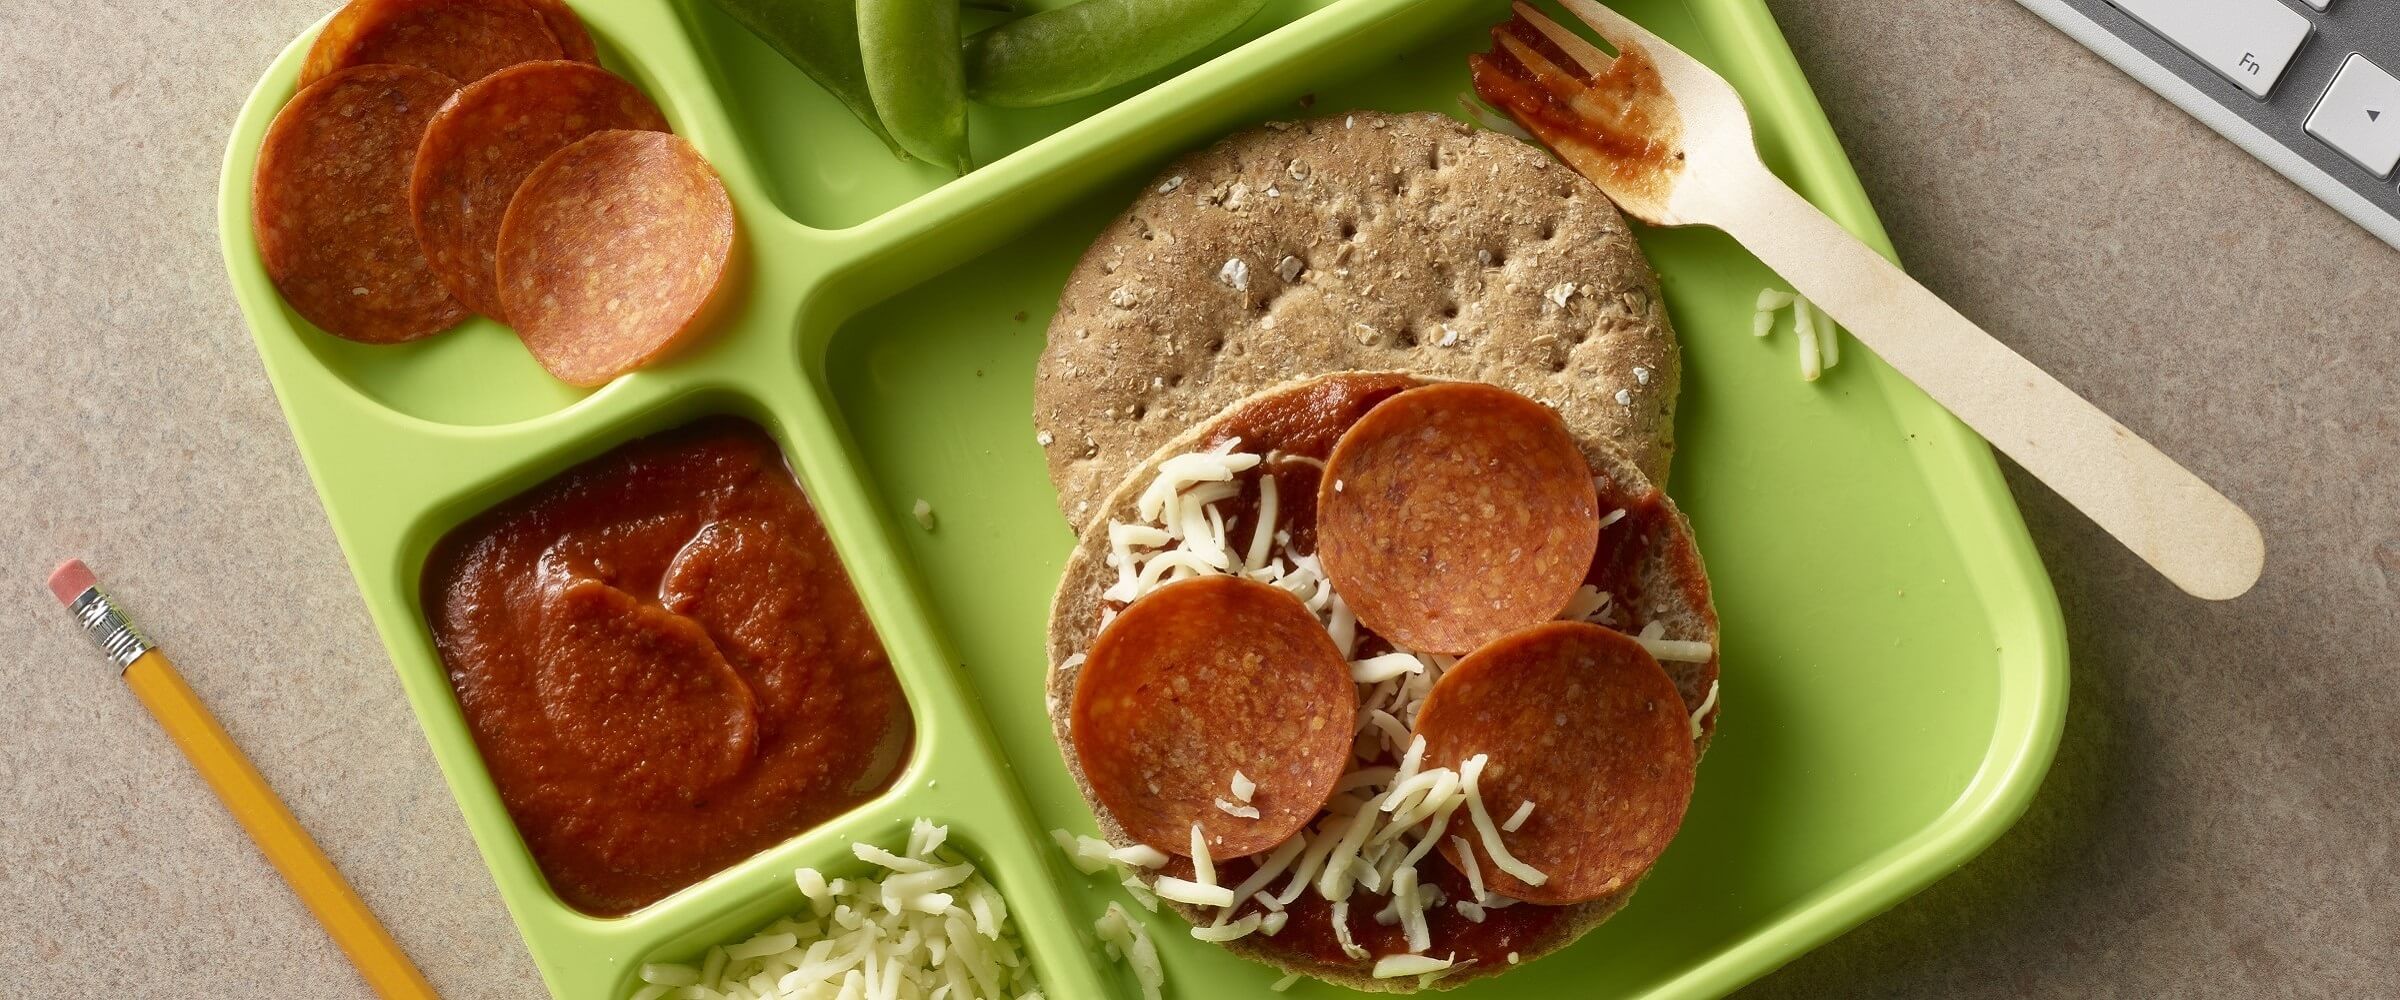 pepperoni pizza in green bento box with extra ingredients